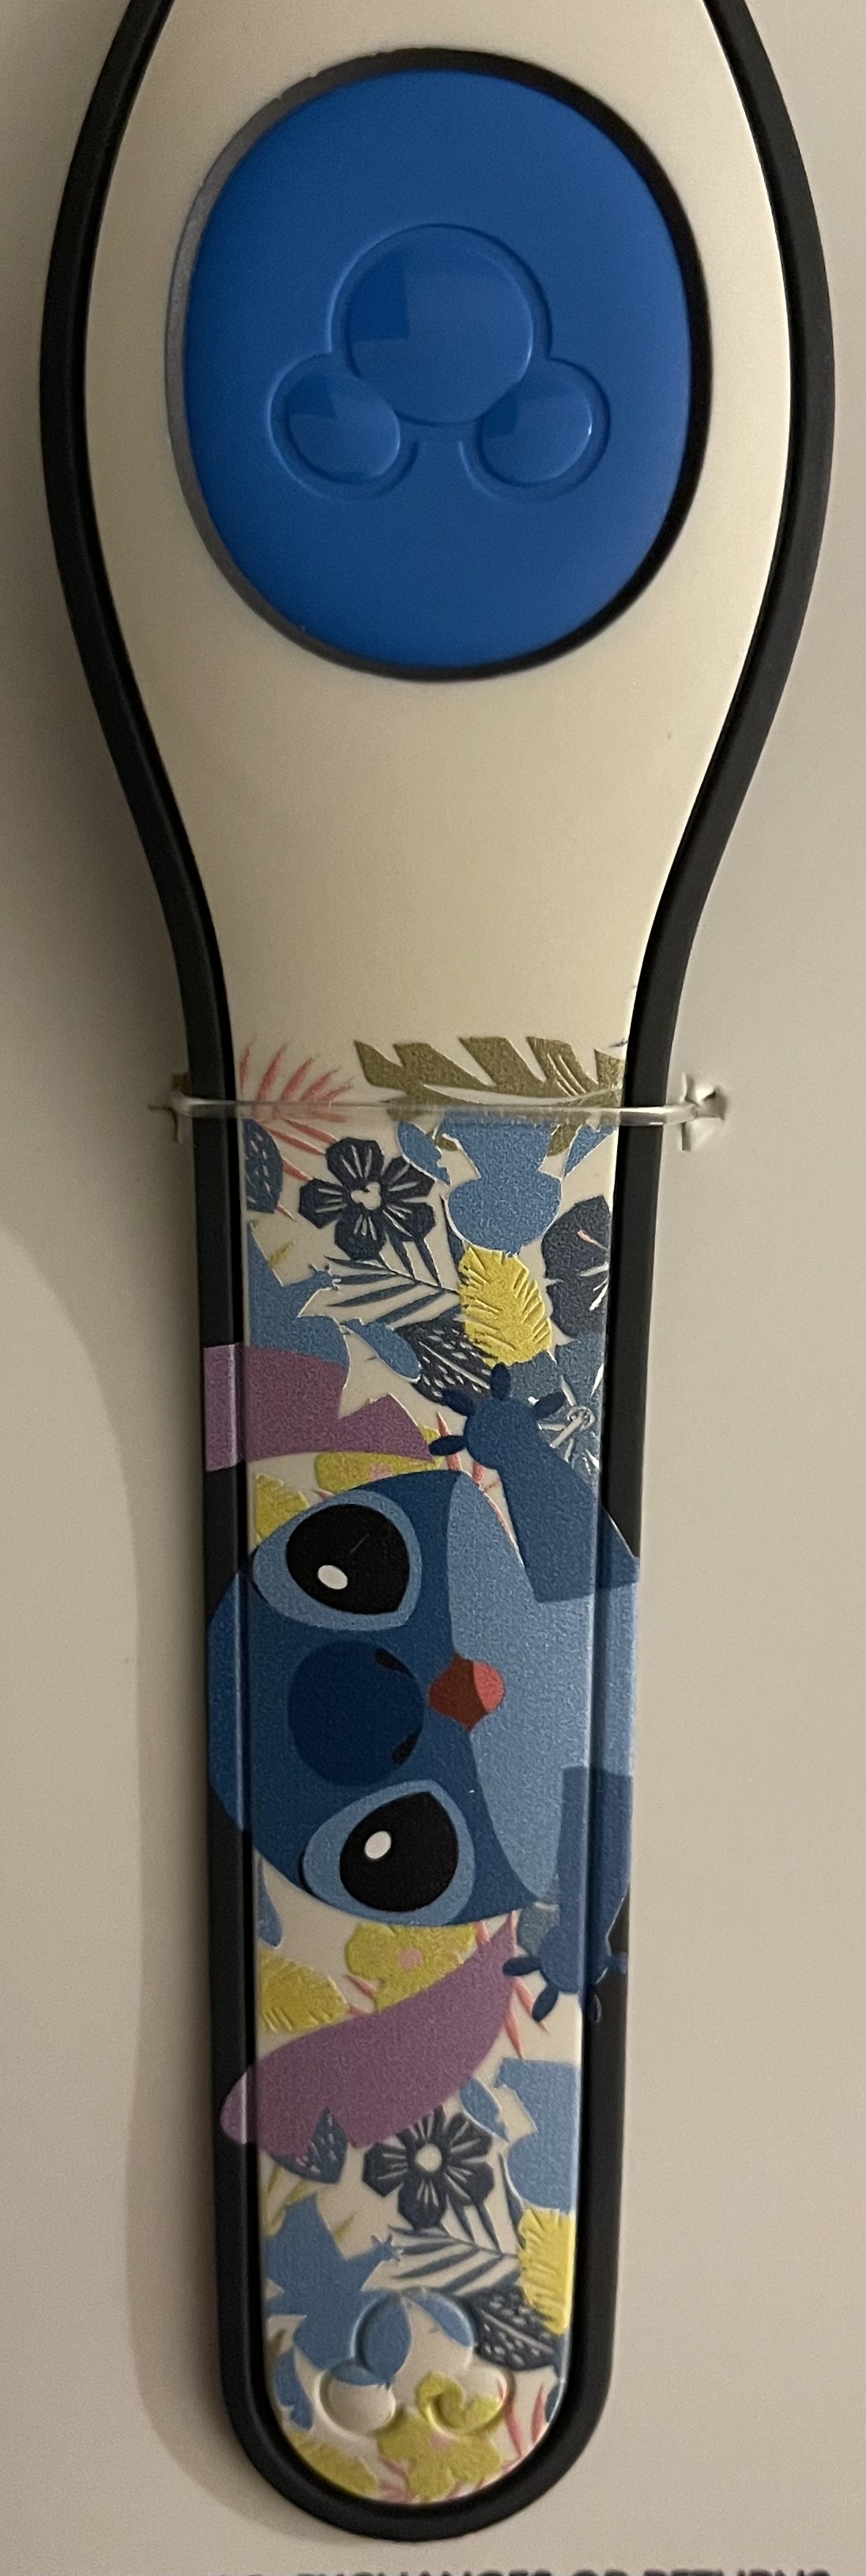 Stitch Open Edition MagicBand has been released today